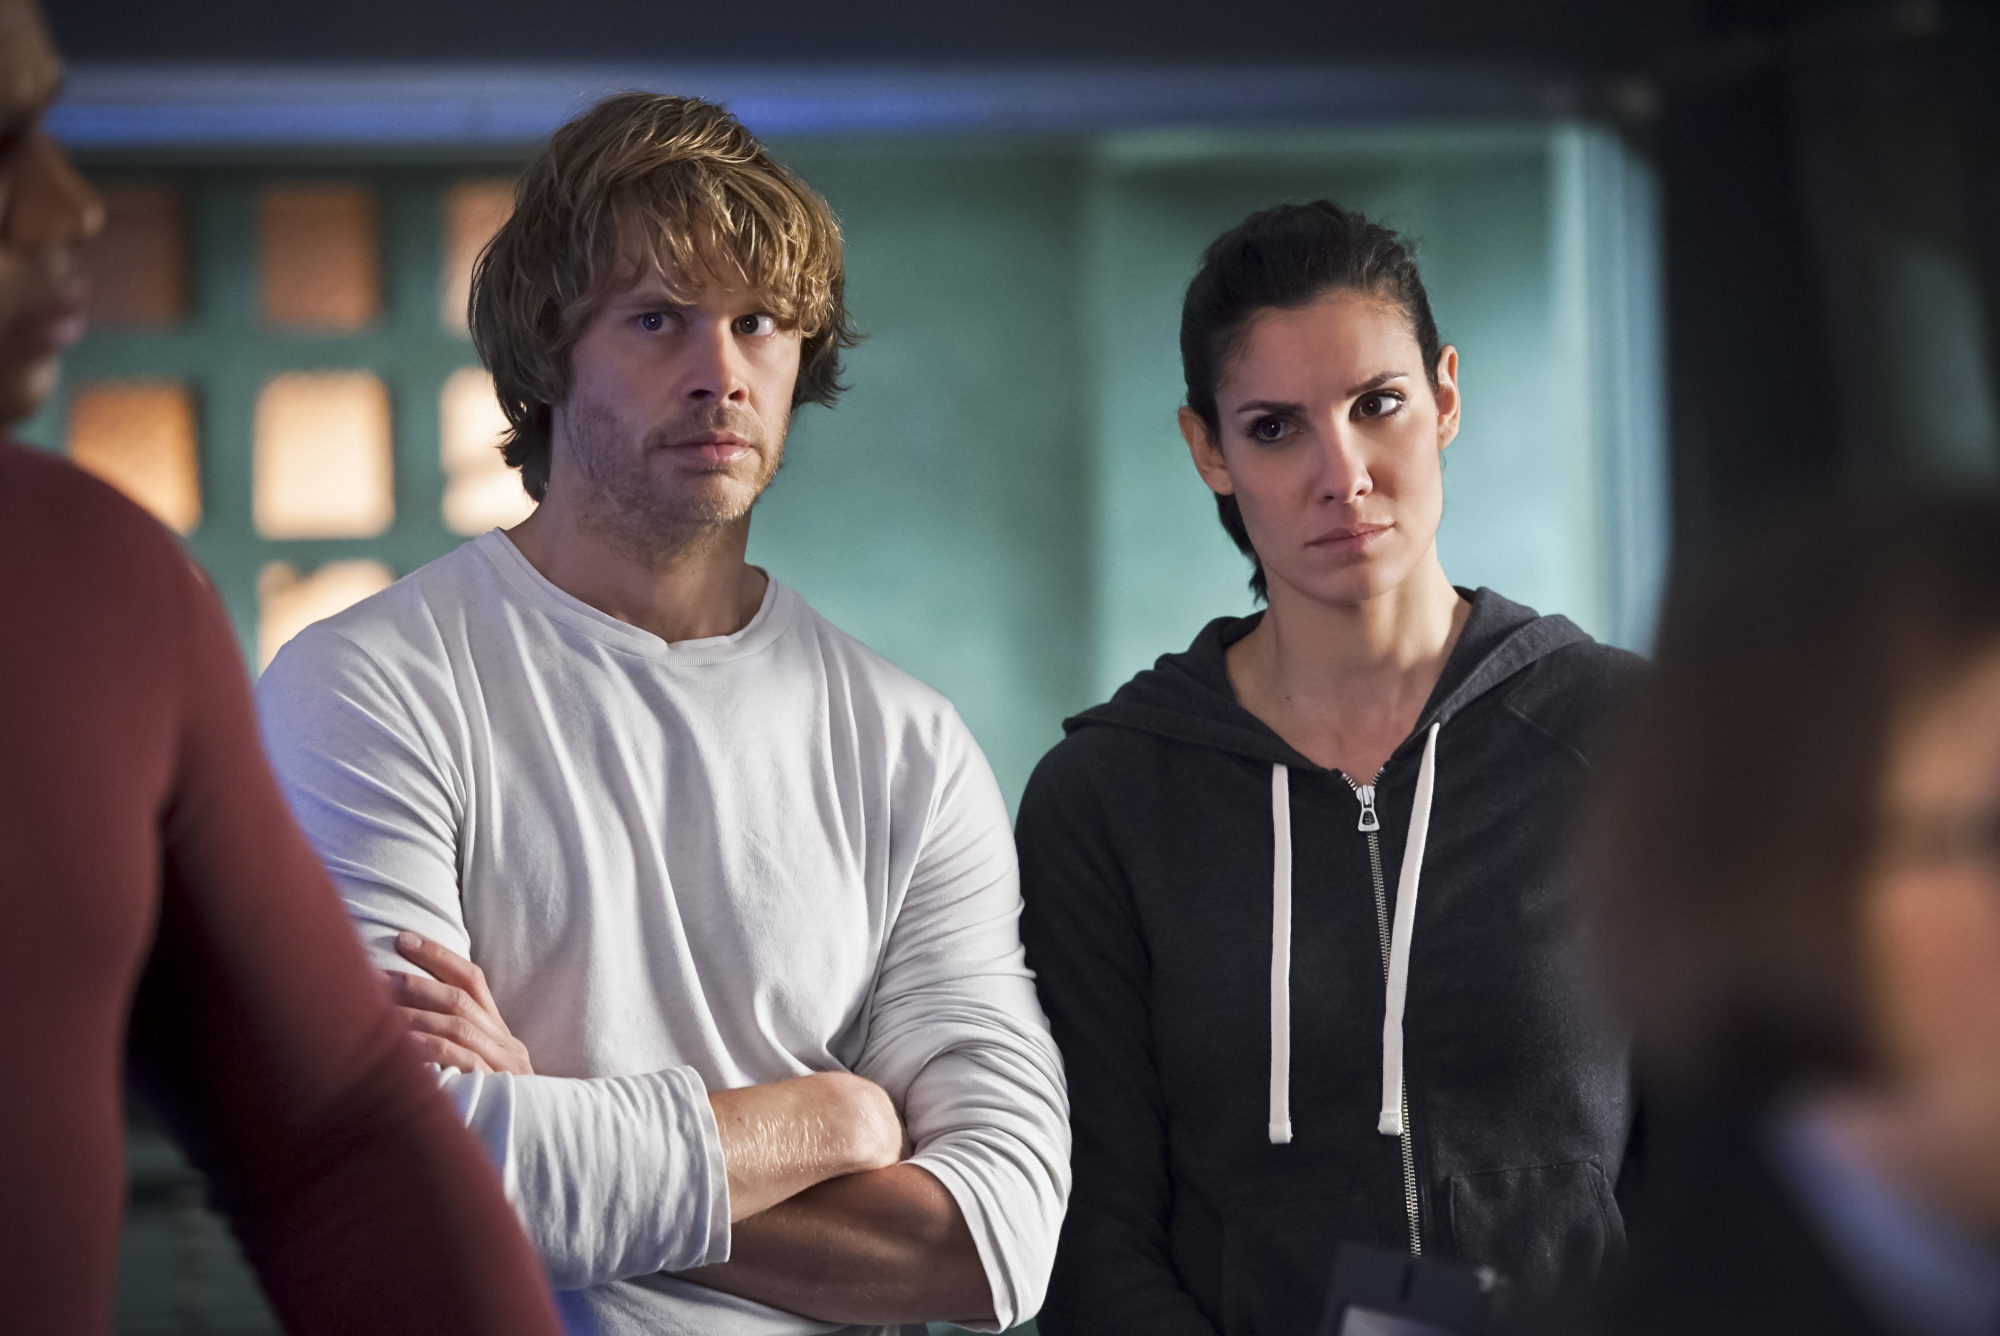 Eric Christian Olsen as LAPD Liaison Marty Deeks and Daniela Ruah as Special Agent Kensi Blye